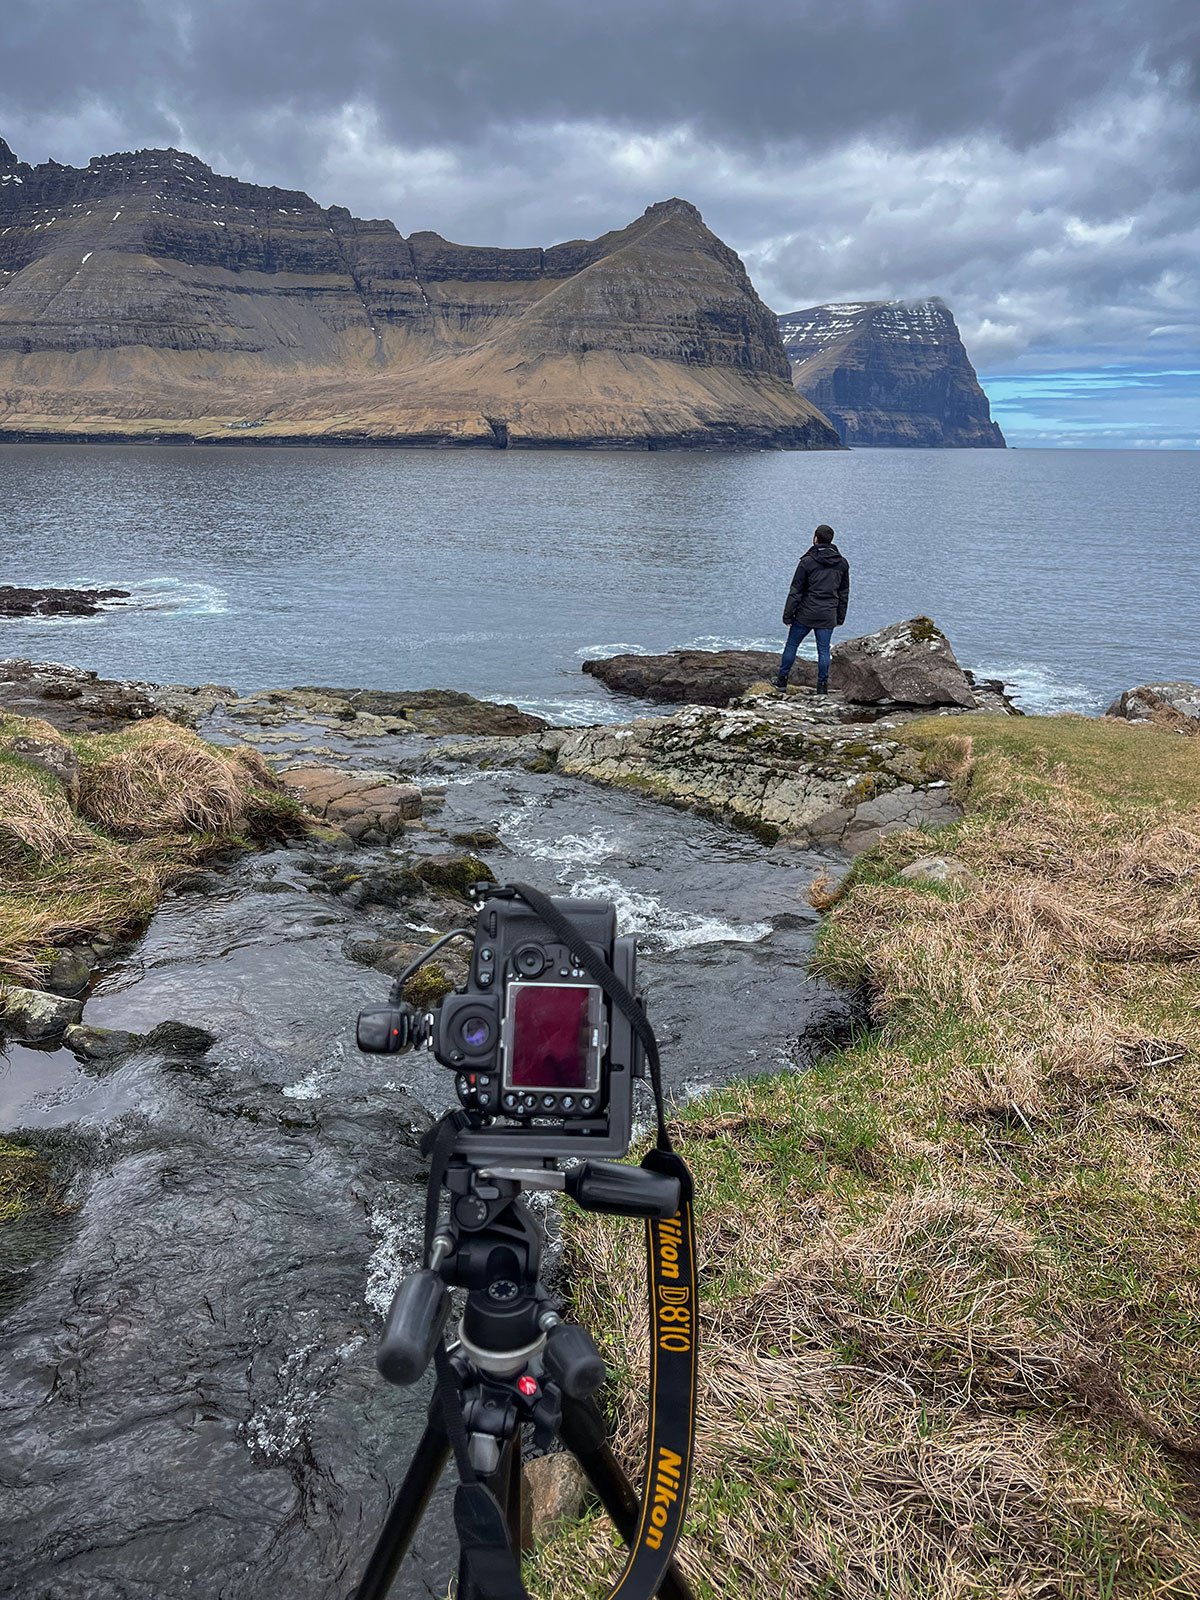 This exhilarating image captures the thrill of the moment as my Nikon D810 frames a stunning scene on Viðoy Island. With the powerful lens focused on the cascading waterfall, the camera immortalizes the daring adventure of my friend bravely standing below the rushing waters.